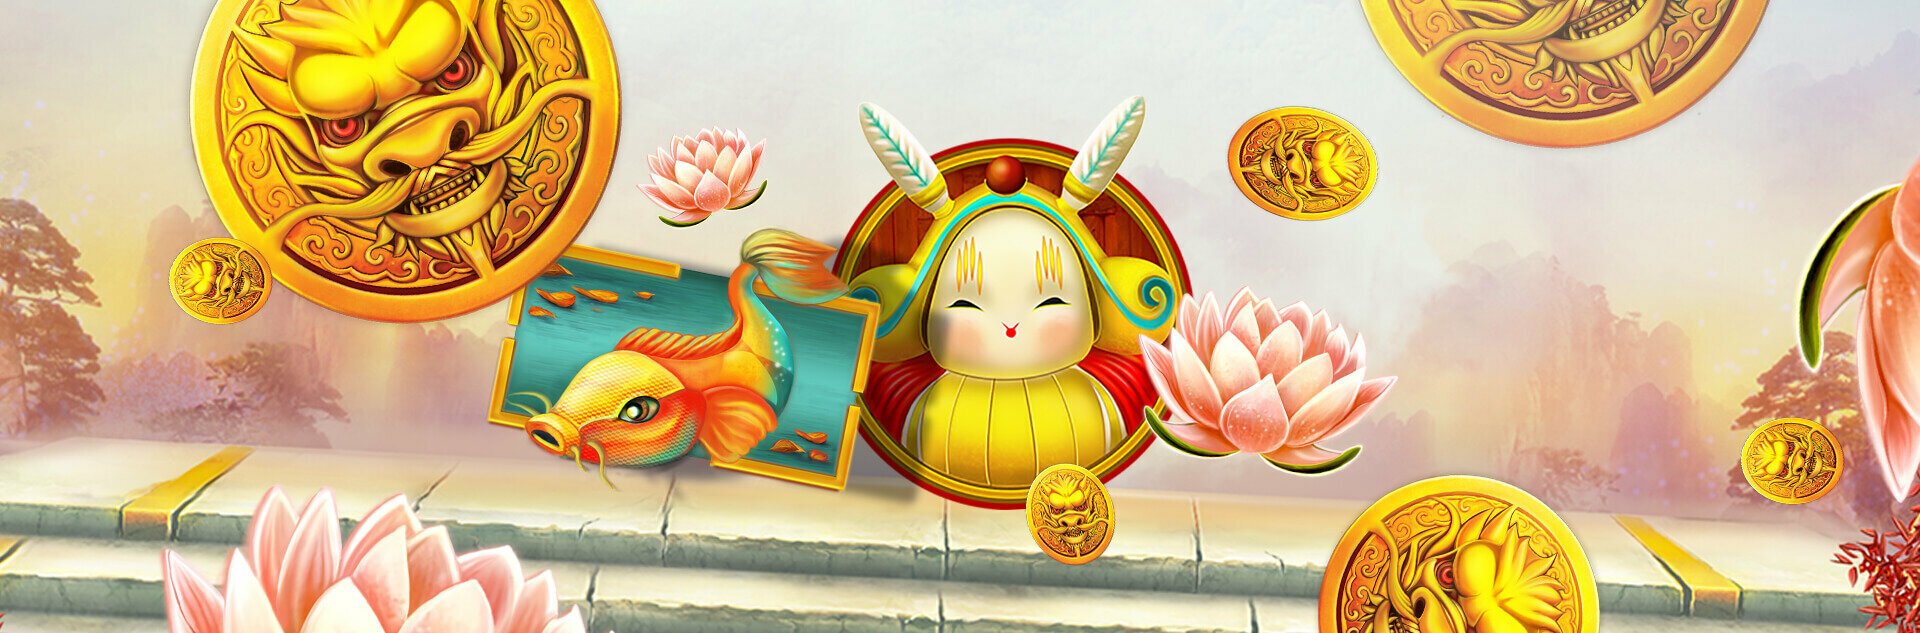 Dragon's Luck Power Reels Free Spins